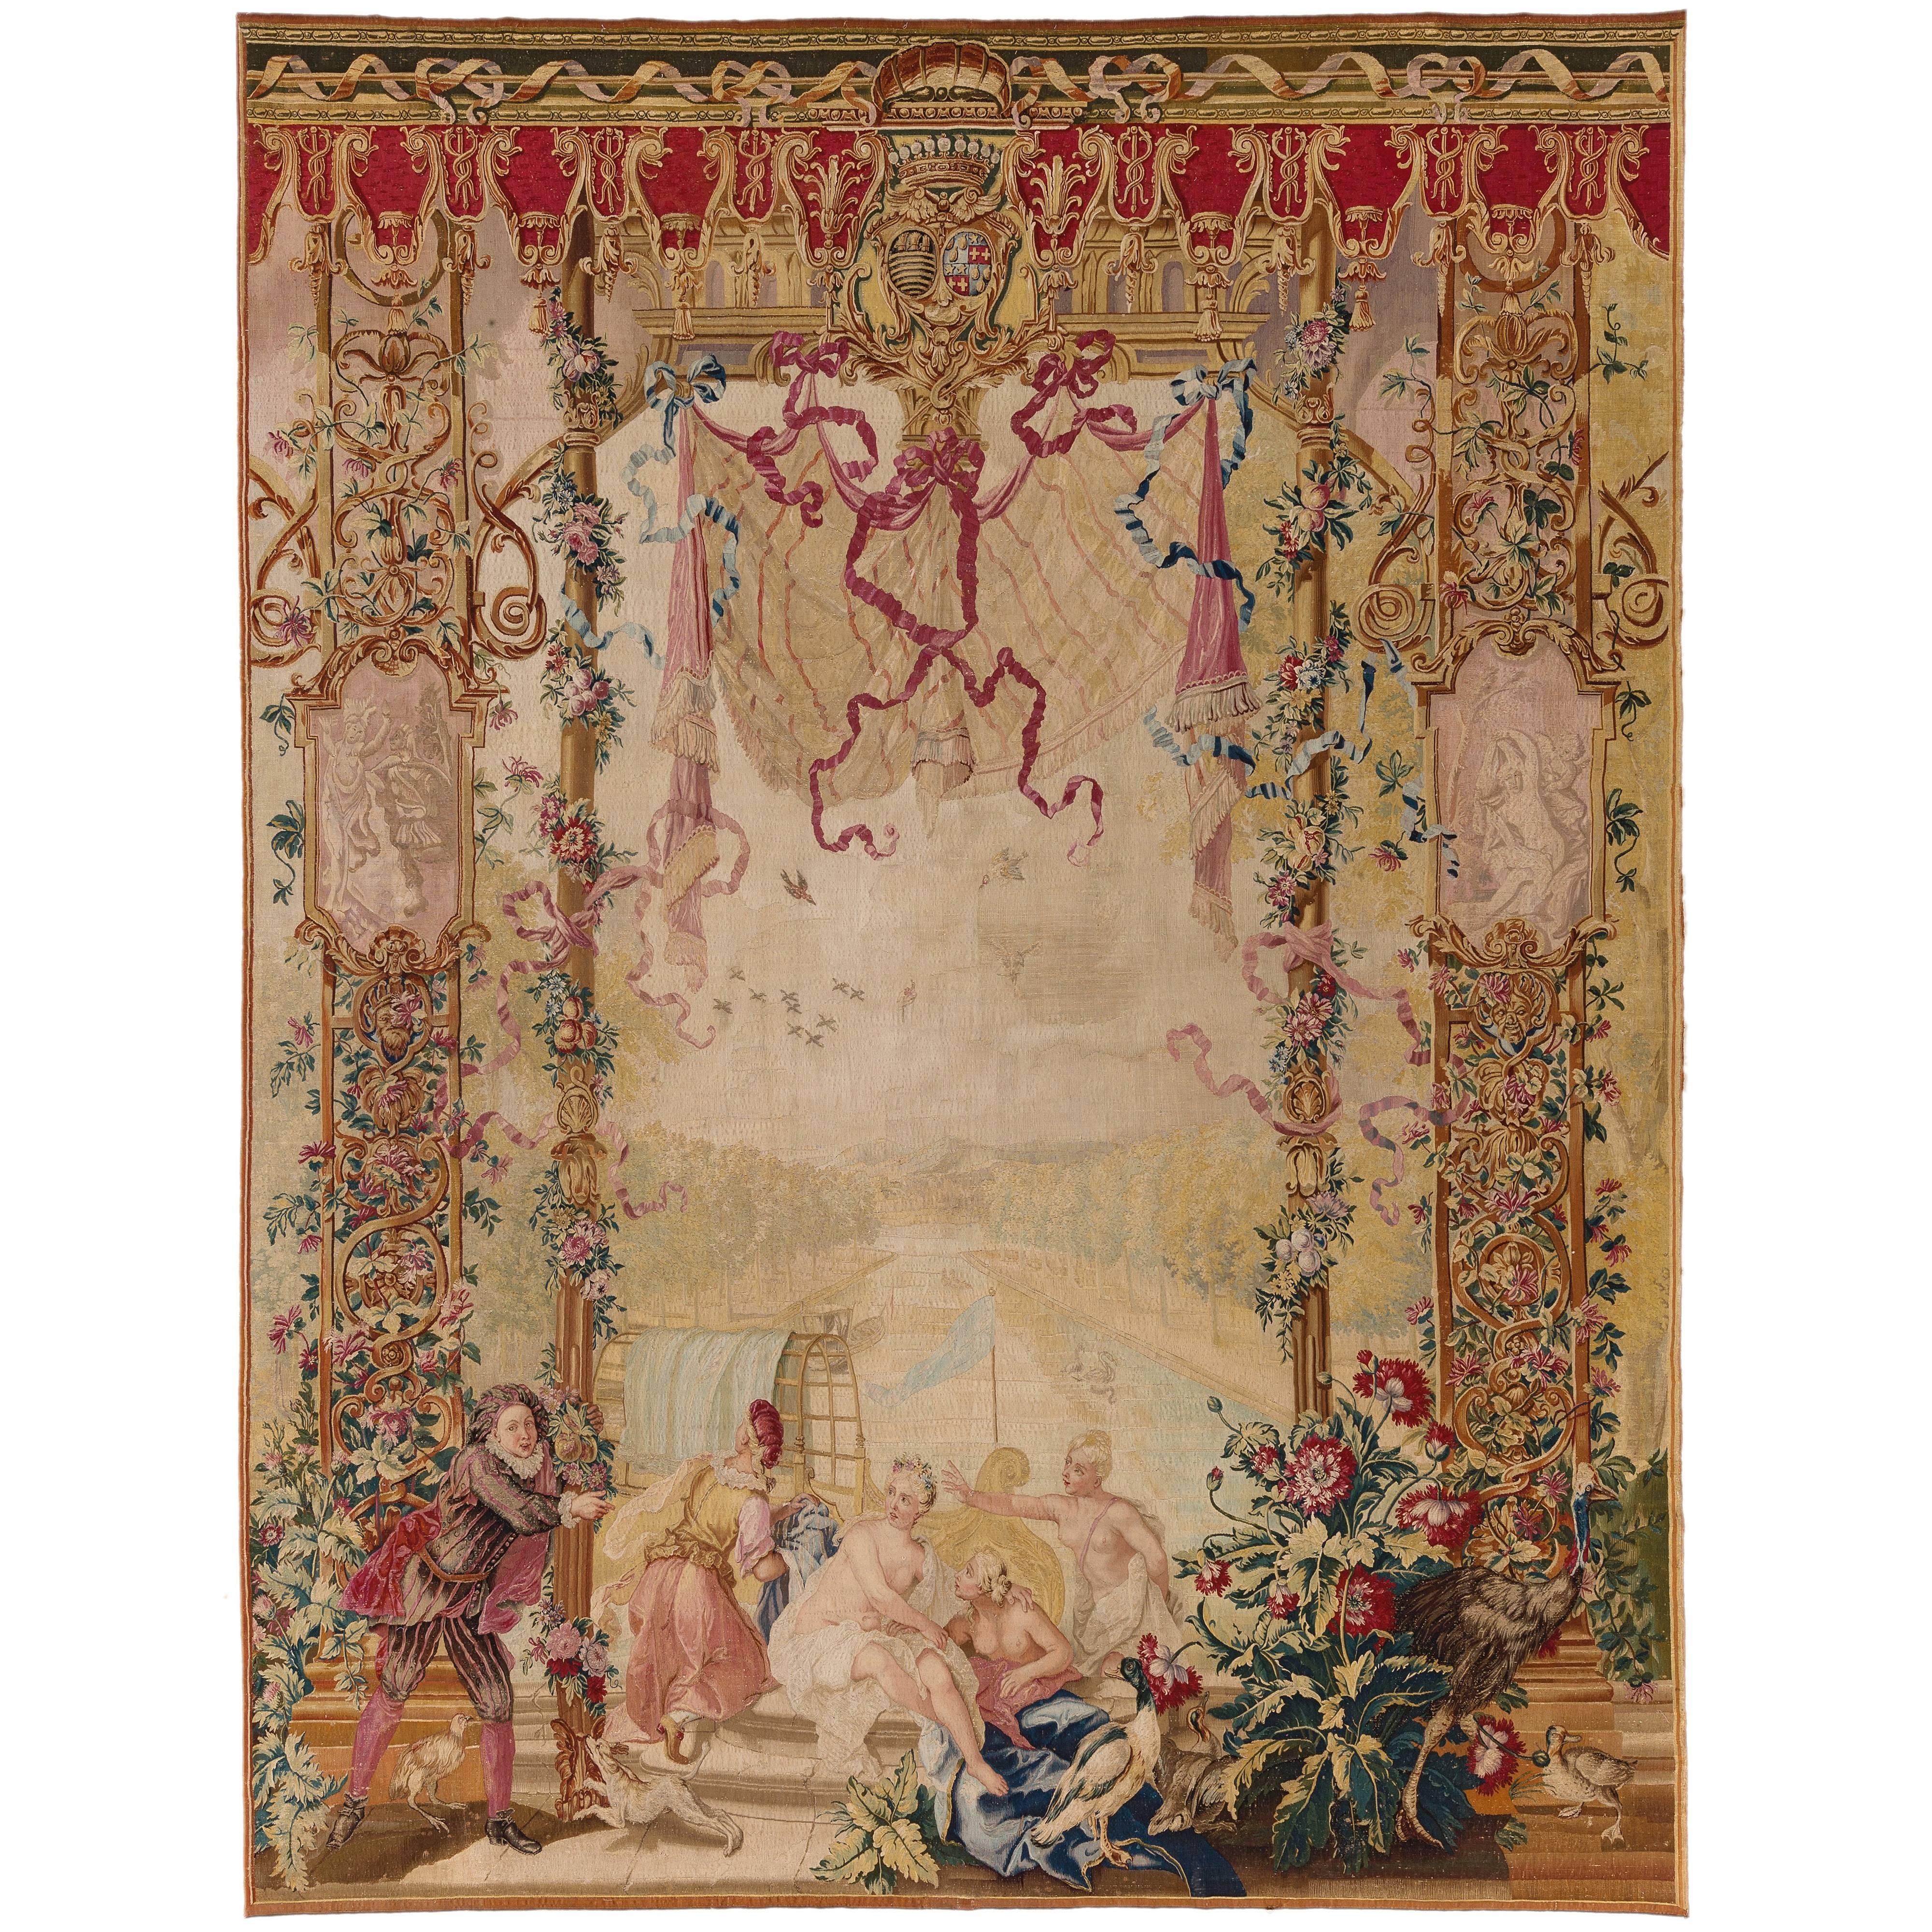 18th Century French Beauvais Tapestry, "Scapin and the Bathers" For Sale